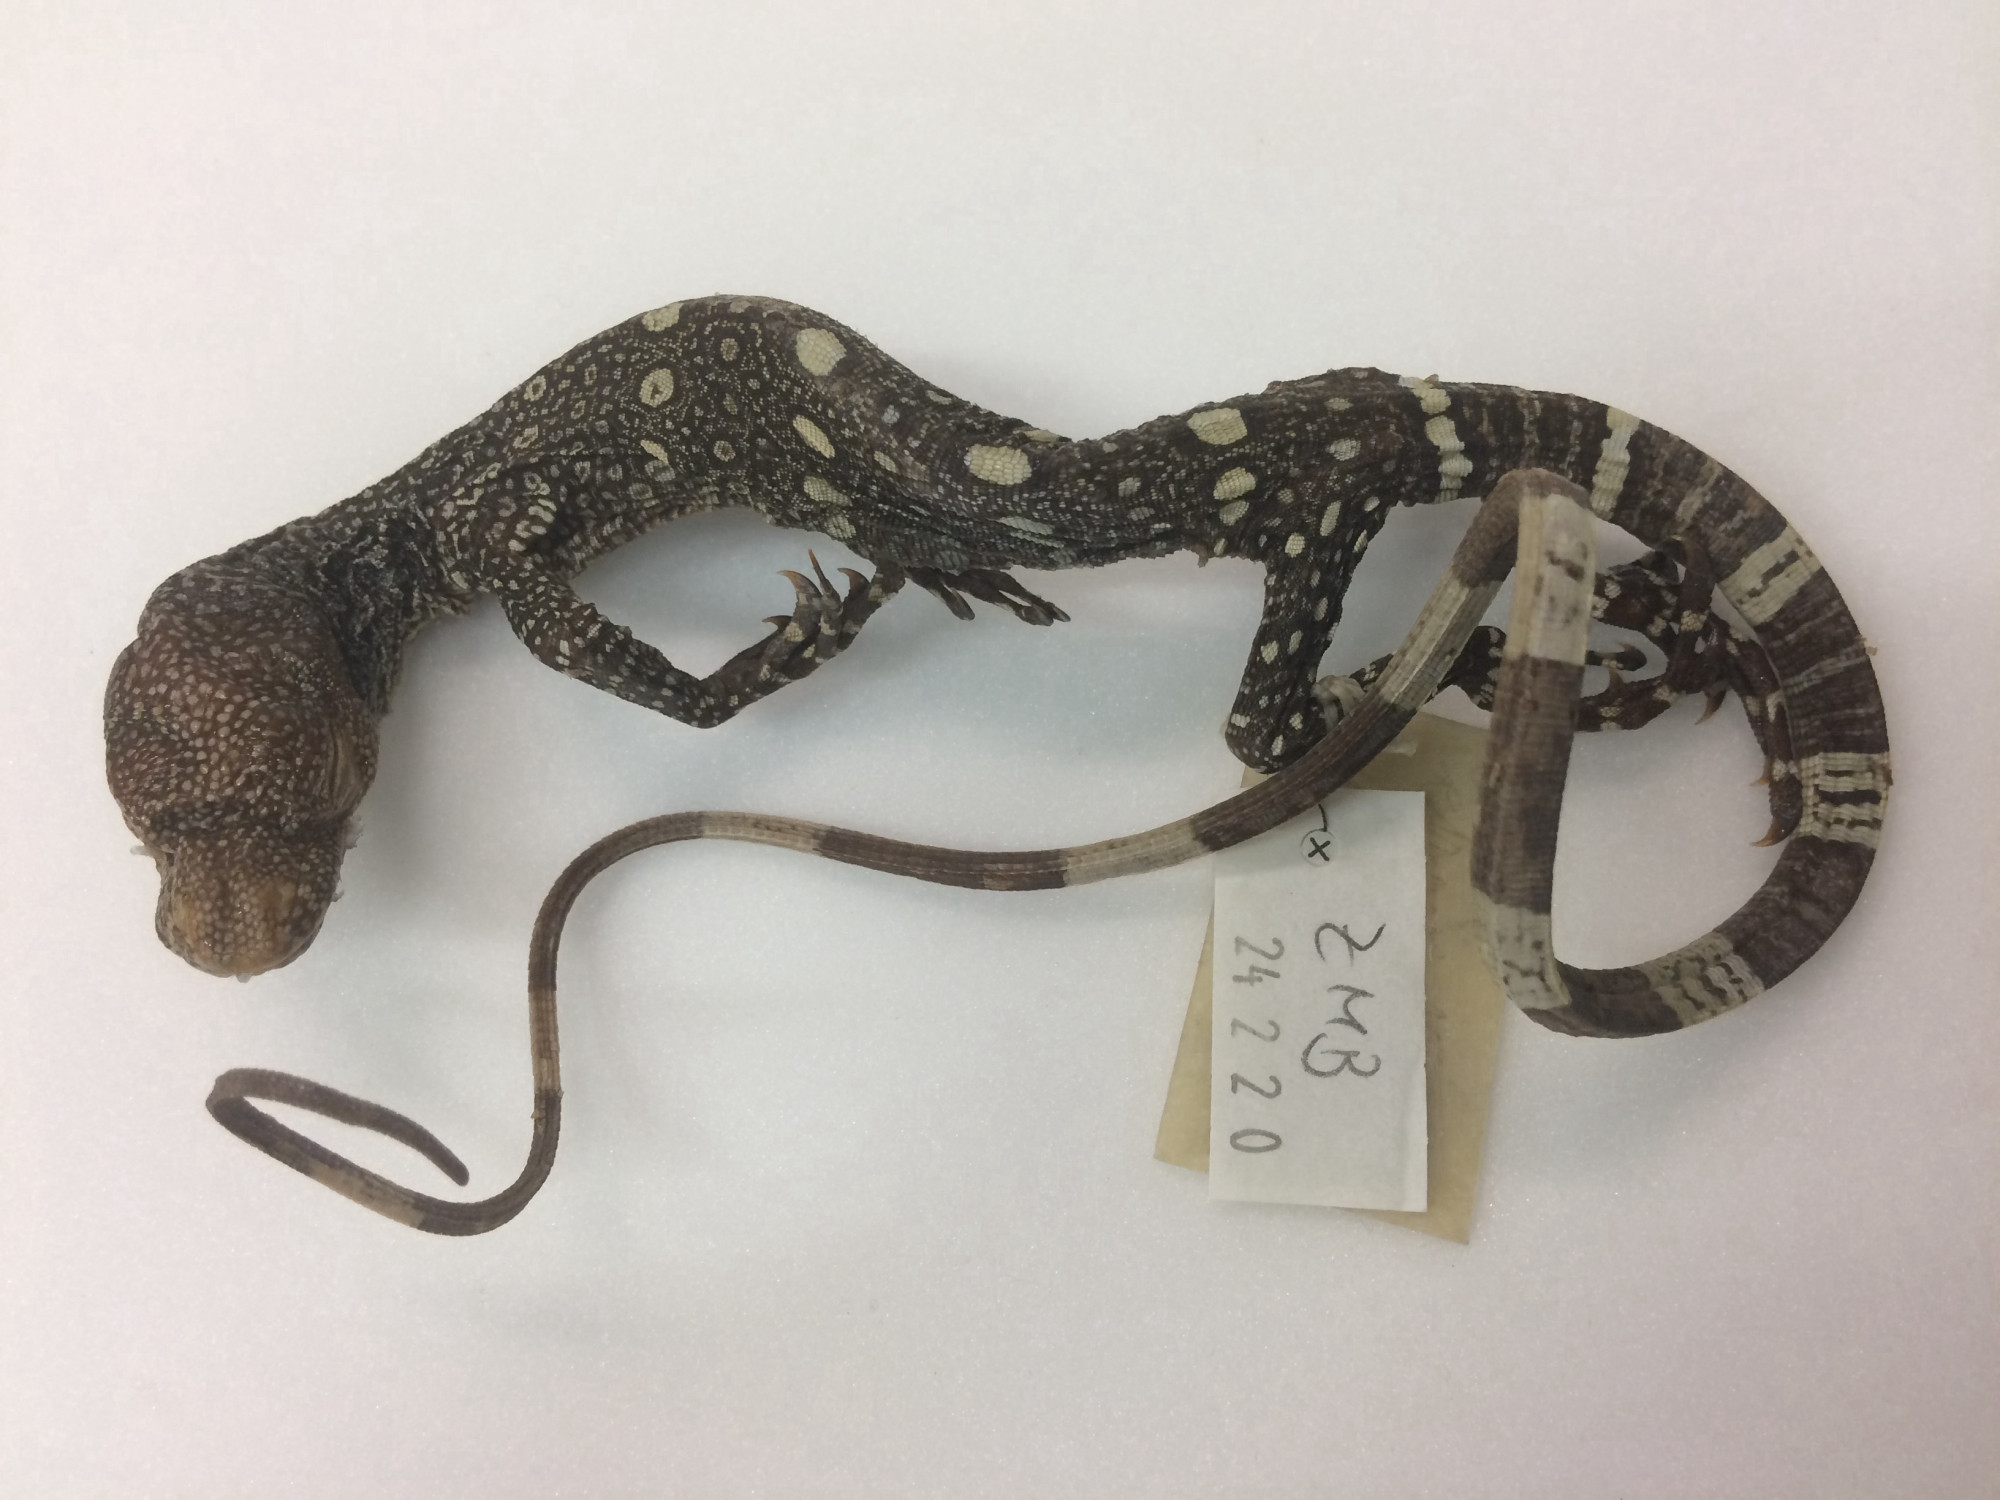 The specimen of a monitor lizard lies on a white background. A label is attached to the leg.